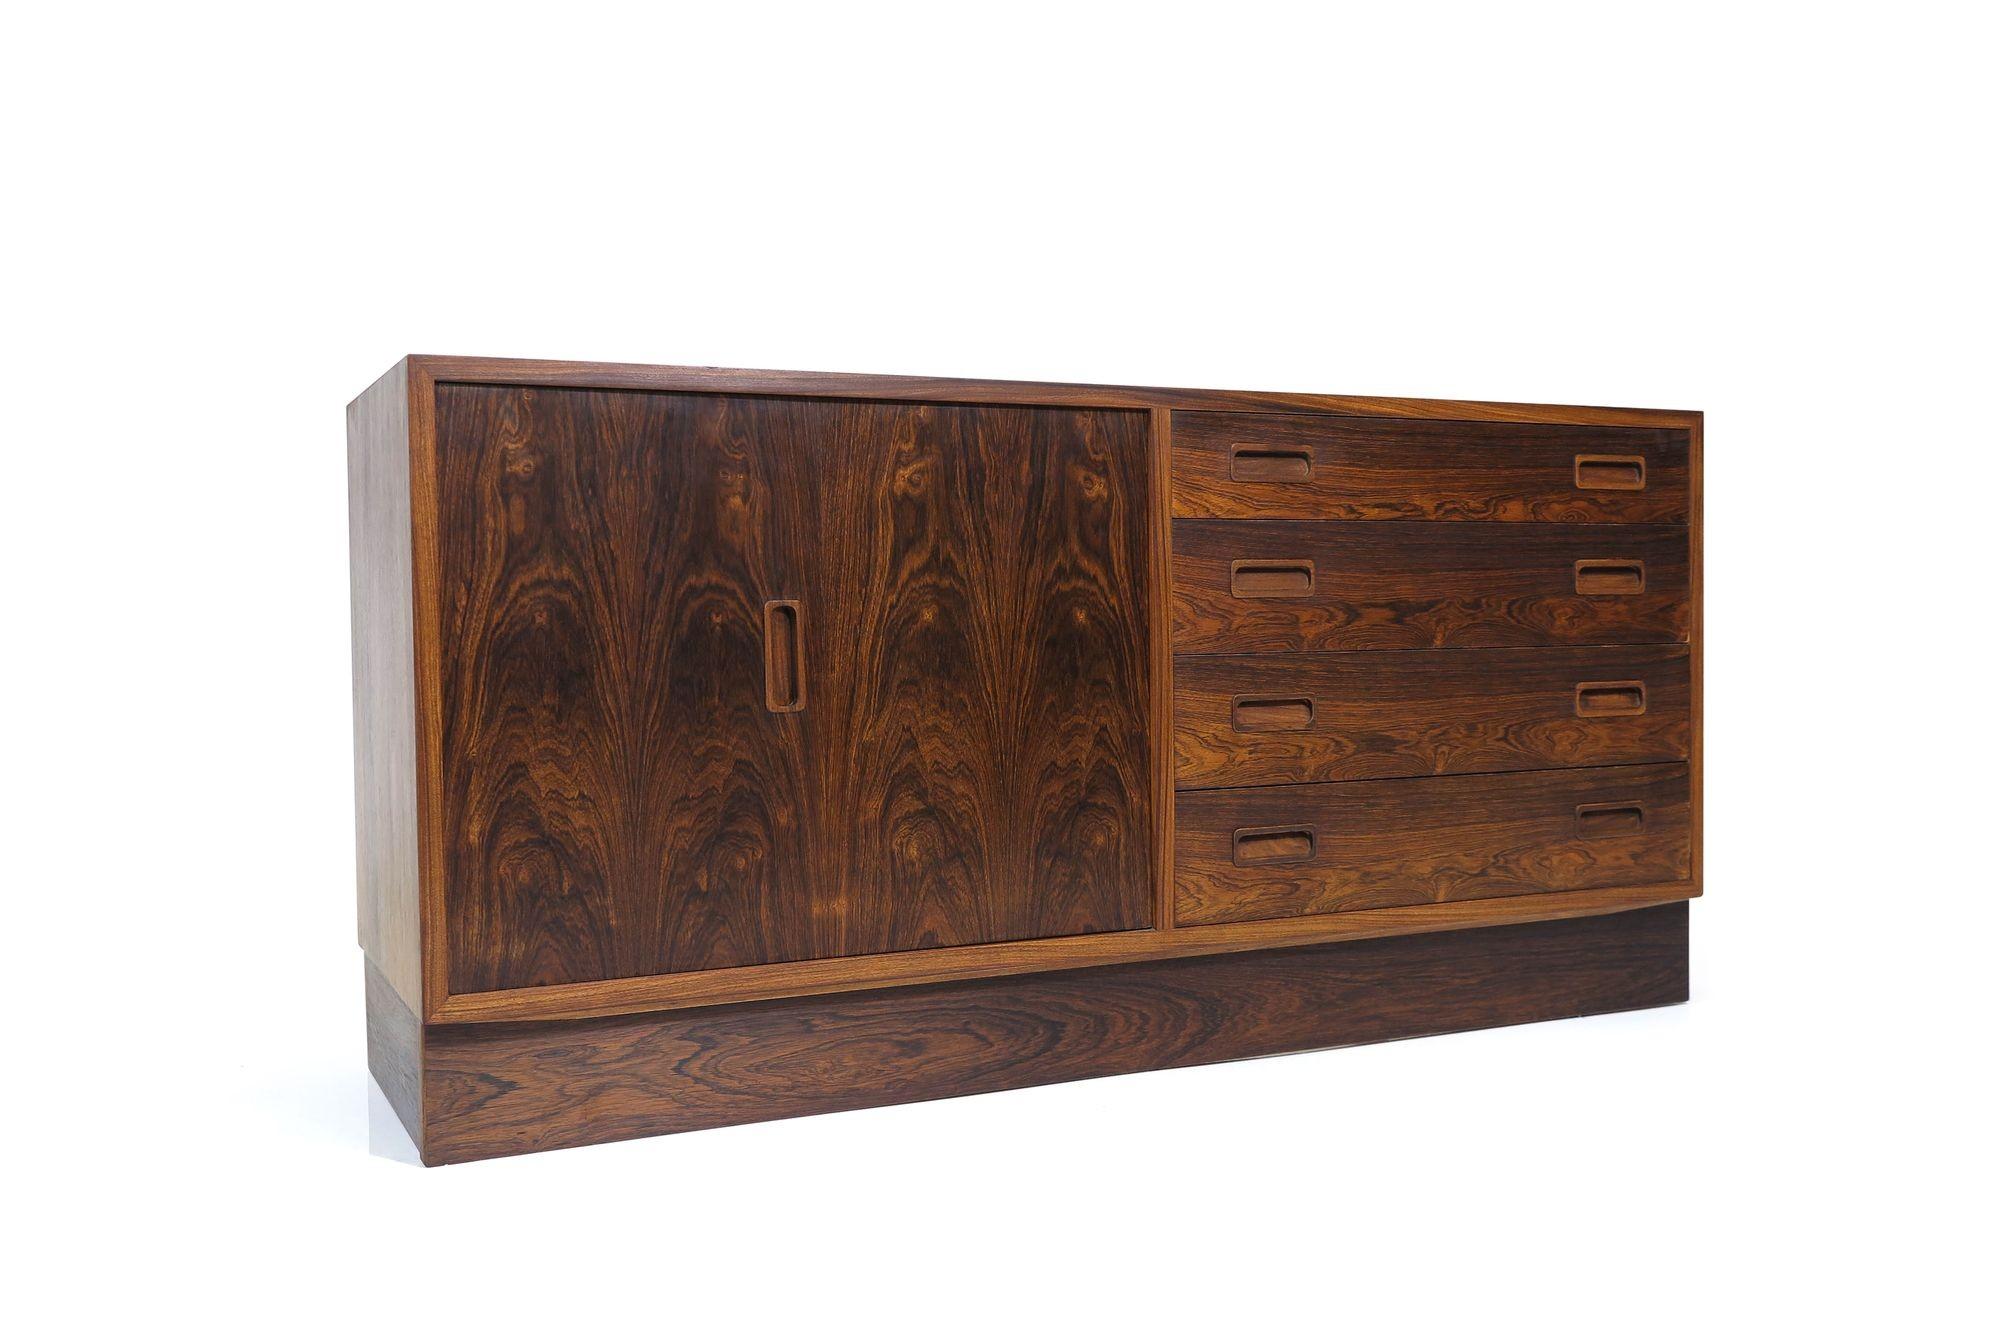 MId-century Danish Rosewood Bifold Low Sideboard In Excellent Condition For Sale In Oakland, CA